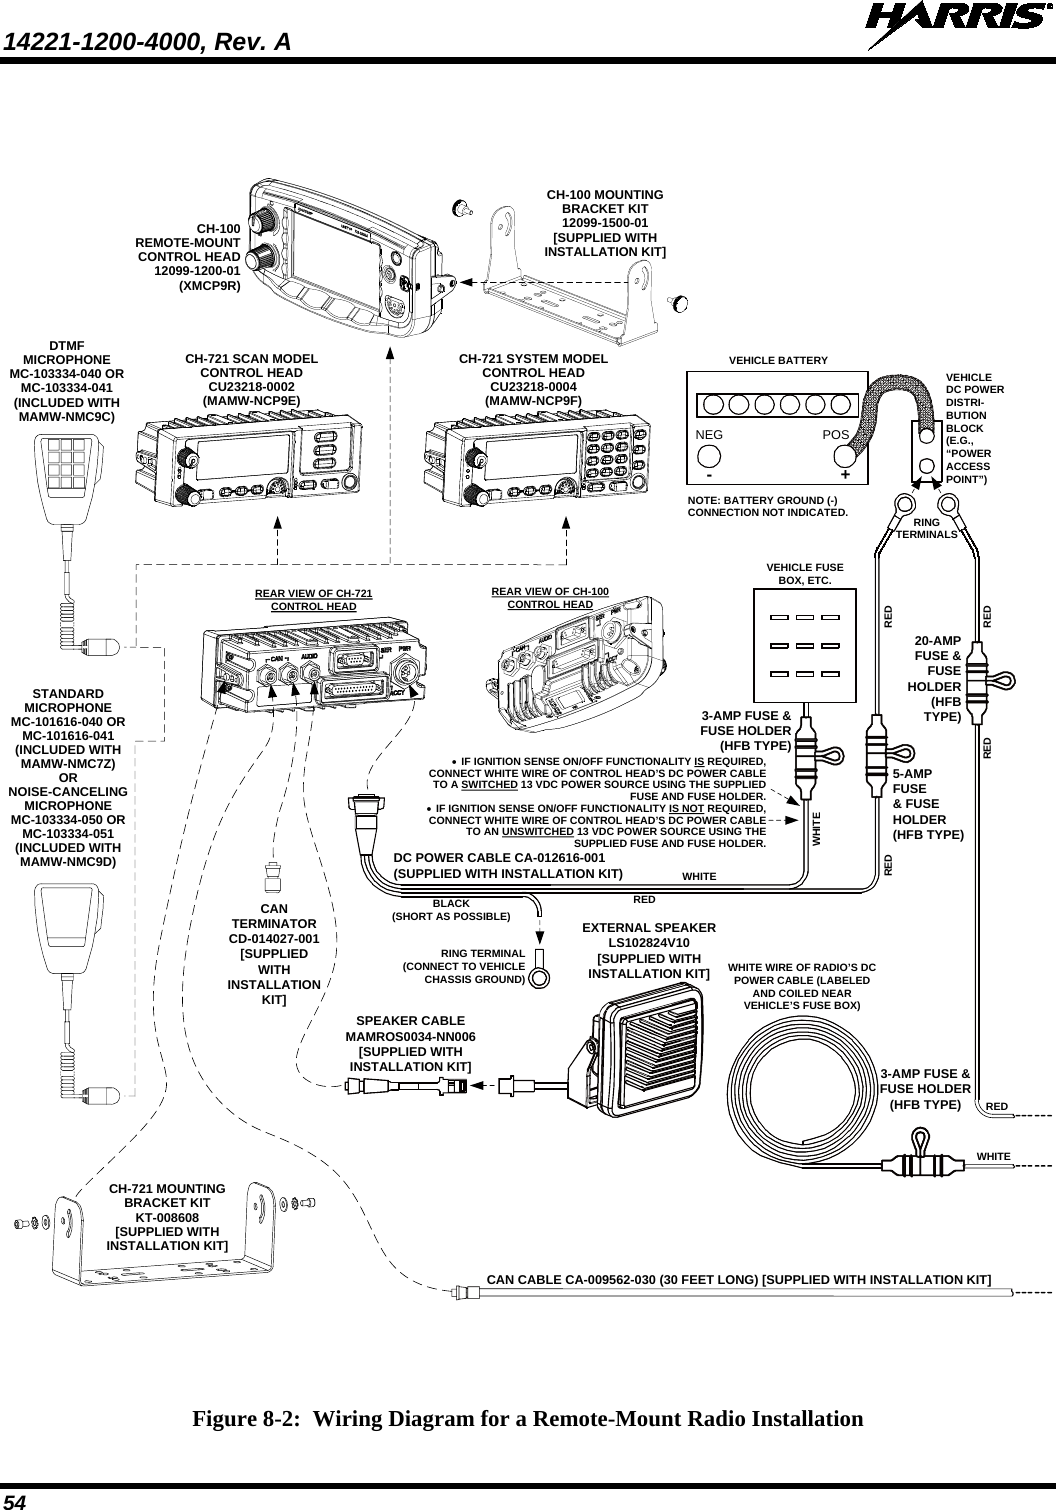 14221-1200-4000, Rev. A    54  Figure 8-2:  Wiring Diagram for a Remote-Mount Radio Installation CH-721 SCAN MODELCONTROL HEADCU23218-0002(MAMW-NCP9E)CH-721 SYSTEM MODELCONTROL HEADCU23218-0004(MAMW-NCP9F)DTMFMICROPHONEMC-103334-040 ORMC-103334-041(INCLUDED WITHMAMW-NMC9C)STANDARD MICROPHONEMC-101616-040 ORMC-101616-041(INCLUDED WITHMAMW-NMC7Z)ORNOISE-CANCELINGMICROPHONEMC-103334-050 ORMC-103334-051(INCLUDED WITHMAMW-NMC9D)CH-721 MOUNTING BRACKET KITKT-008608[SUPPLIED WITH INSTALLATION KIT]•  IF IGNITION SENSE ON/OFF FUNCTIONALITY IS REQUIRED, CONNECT WHITE WIRE OF CONTROL HEAD’S DC POWER CABLE TO A SWITCHED 13 VDC POWER SOURCE USING THE SUPPLIED FUSE AND FUSE HOLDER.•  IF IGNITION SENSE ON/OFF FUNCTIONALITY IS NOT REQUIRED, CONNECT WHITE WIRE OF CONTROL HEAD’S DC POWER CABLE TO AN UNSWITCHED 13 VDC POWER SOURCE USING THE SUPPLIED FUSE AND FUSE HOLDER.REAR VIEW OF CH-721CONTROL HEADNEG POS3-AMP FUSE &amp; FUSE HOLDER (HFB TYPE) REDRED RED5-AMPFUSE&amp; FUSE HOLDER (HFB TYPE)3-AMP FUSE &amp; FUSE HOLDER(HFB TYPE)20-AMPFUSE &amp; FUSE HOLDER(HFB TYPE)REDWHITEREDRINGTERMINALSVEHICLEDC POWER DISTRI-BUTION BLOCK(E.G., “POWER ACCESS POINT”)VEHICLE BATTERY+-NOTE: BATTERY GROUND (-) CONNECTION NOT INDICATED.CAN TERMINATORCD-014027-001[SUPPLIED WITH INSTALLATION KIT]REDWHITEBLACK(SHORT AS POSSIBLE)RING TERMINAL (CONNECT TO VEHICLE CHASSIS GROUND)CAN CABLE CA-009562-030 (30 FEET LONG) [SUPPLIED WITH INSTALLATION KIT]SPEAKER CABLEMAMROS0034-NN006[SUPPLIED WITHINSTALLATION KIT]EXTERNAL SPEAKERLS102824V10[SUPPLIED WITHINSTALLATION KIT] WHITE WIRE OF RADIO’S DC POWER CABLE (LABELED AND COILED NEAR VEHICLE’S FUSE BOX)DC POWER CABLE CA-012616-001(SUPPLIED WITH INSTALLATION KIT)VEHICLE FUSE BOX, ETC.WHITEREAR VIEW OF CH-100CONTROL HEADCH-100REMOTE-MOUNTCONTROL HEAD12099-1200-01(XMCP9R)CH-100 MOUNTING BRACKET KIT12099-1500-01[SUPPLIED WITH INSTALLATION KIT]